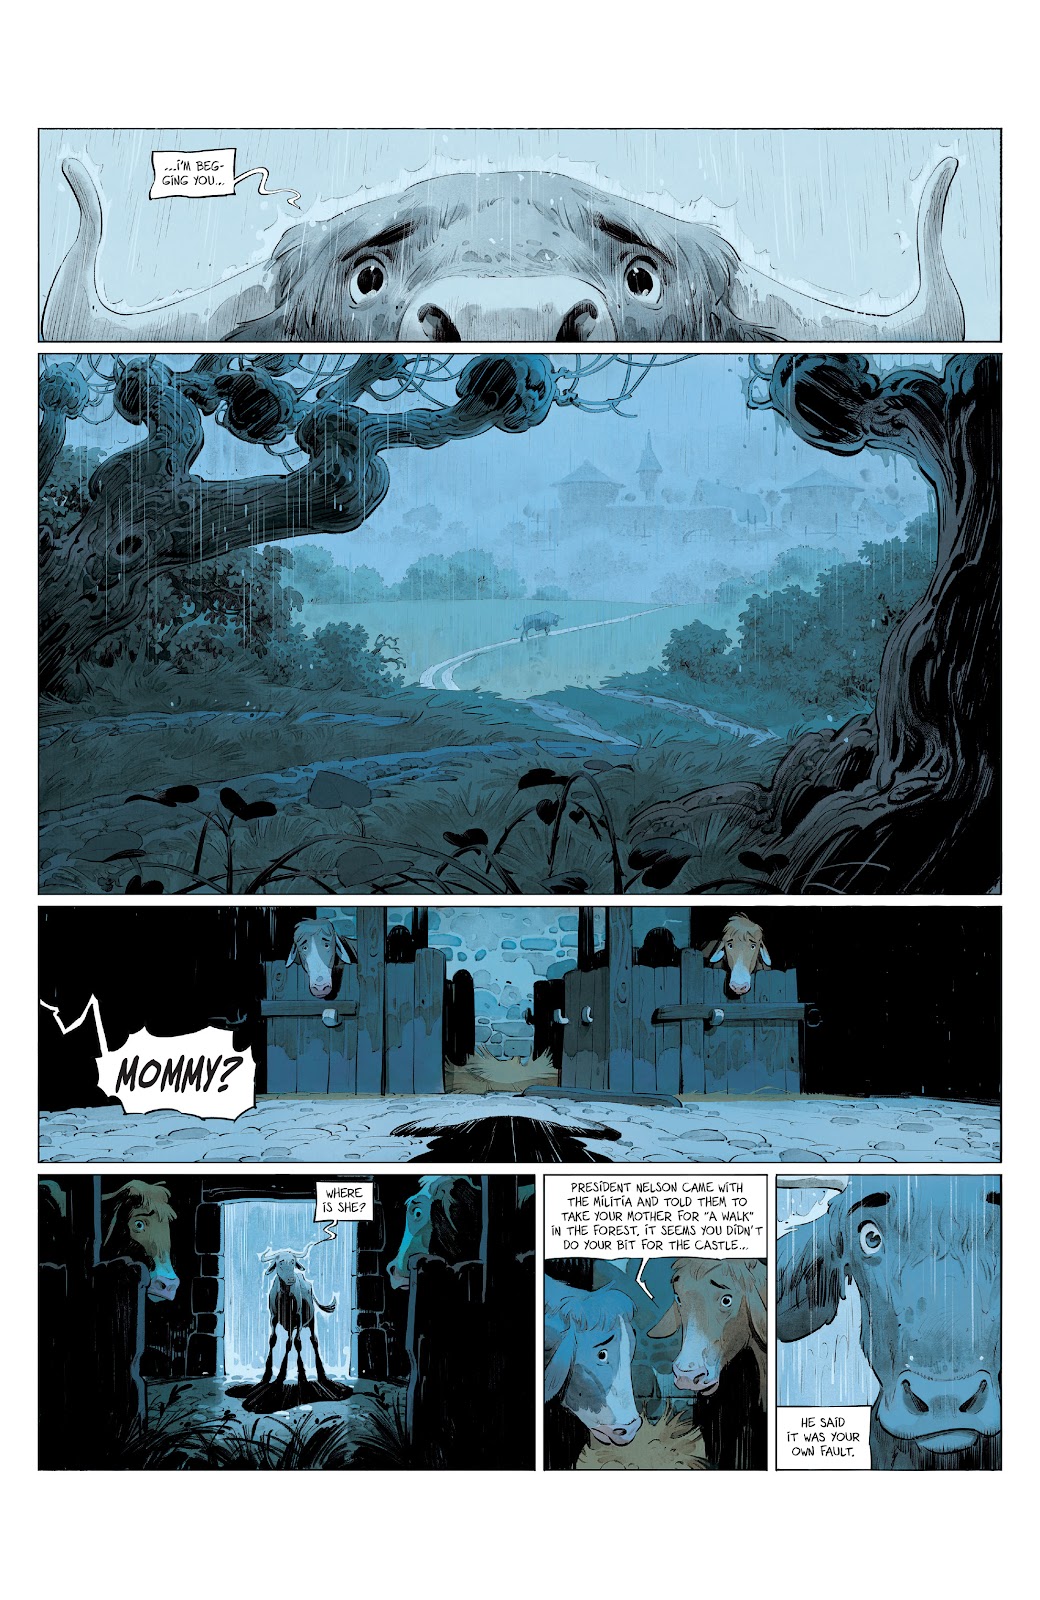 Animal Castle Vol. 2 issue 1 - Page 6